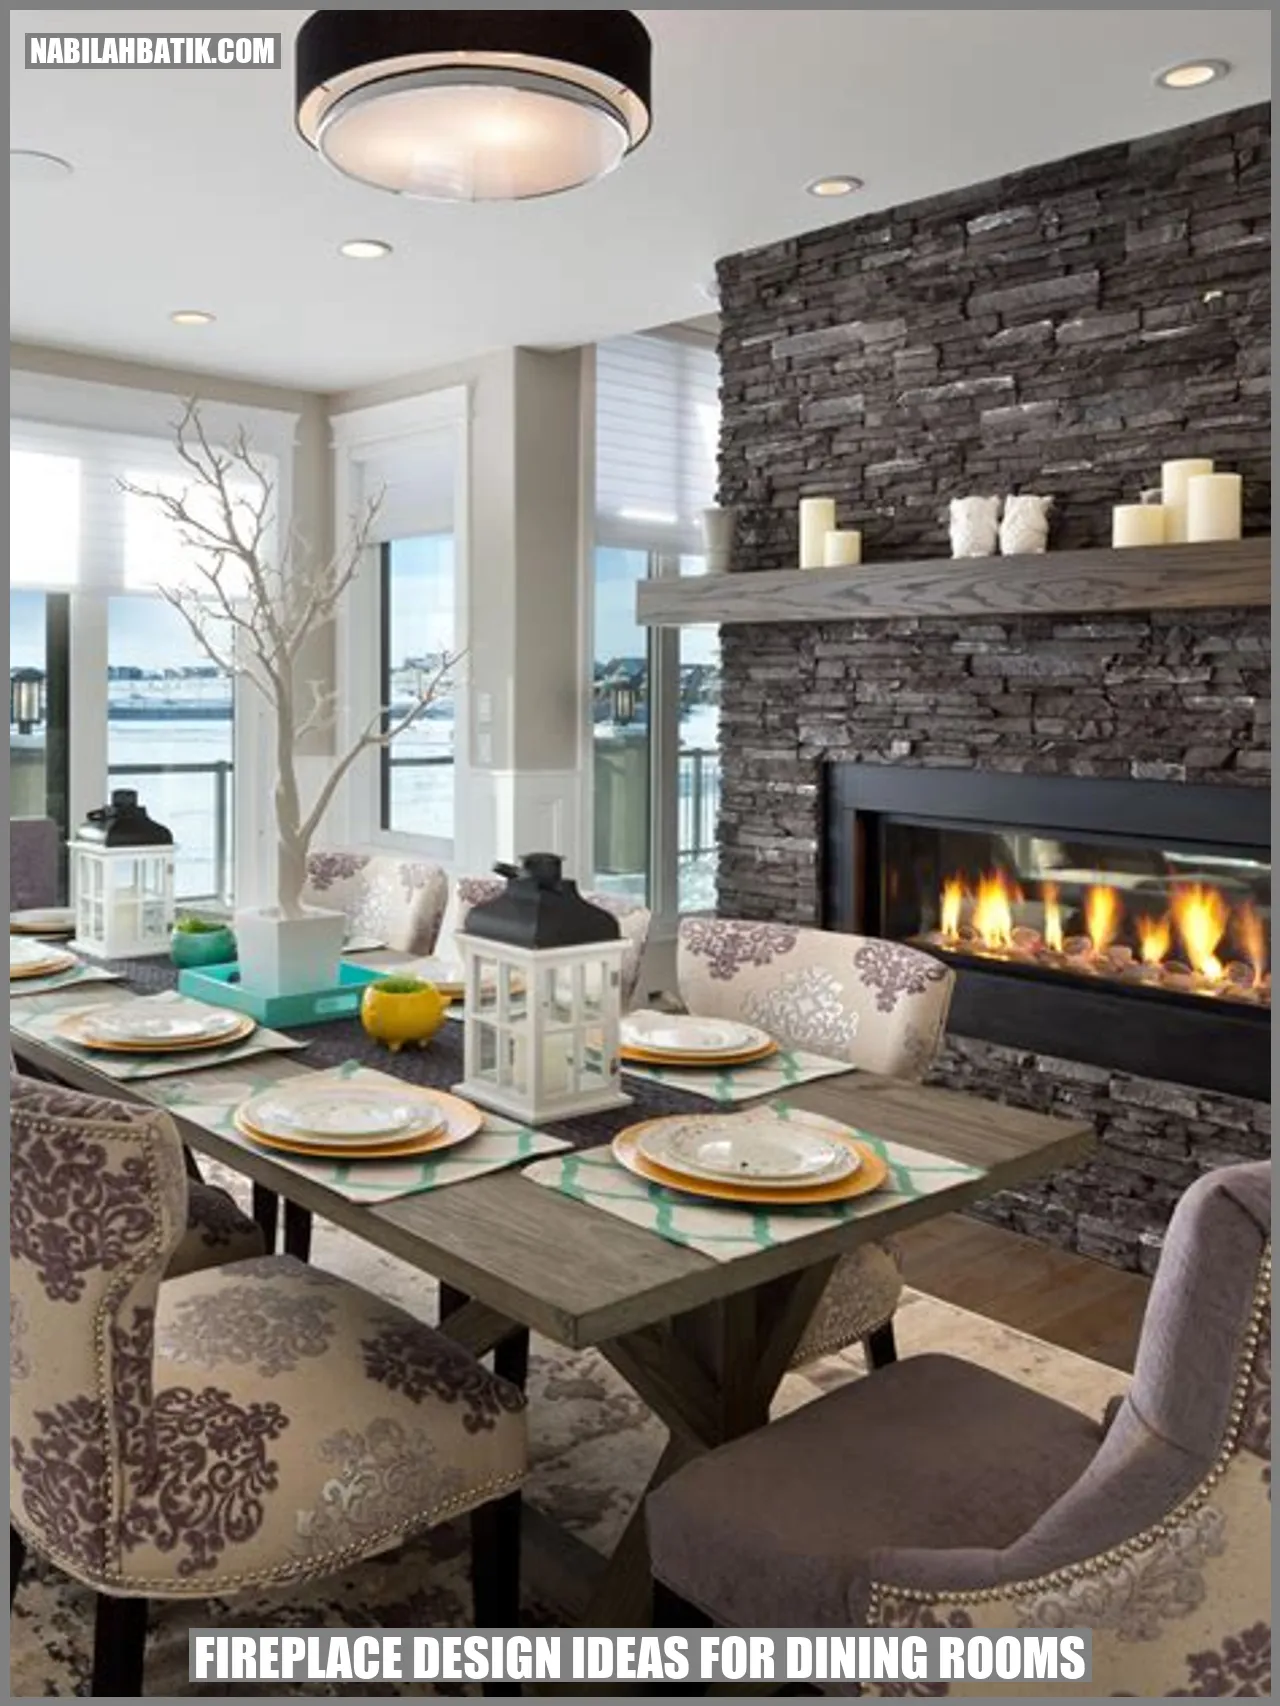 Fireplace Design Ideas for Dining Rooms